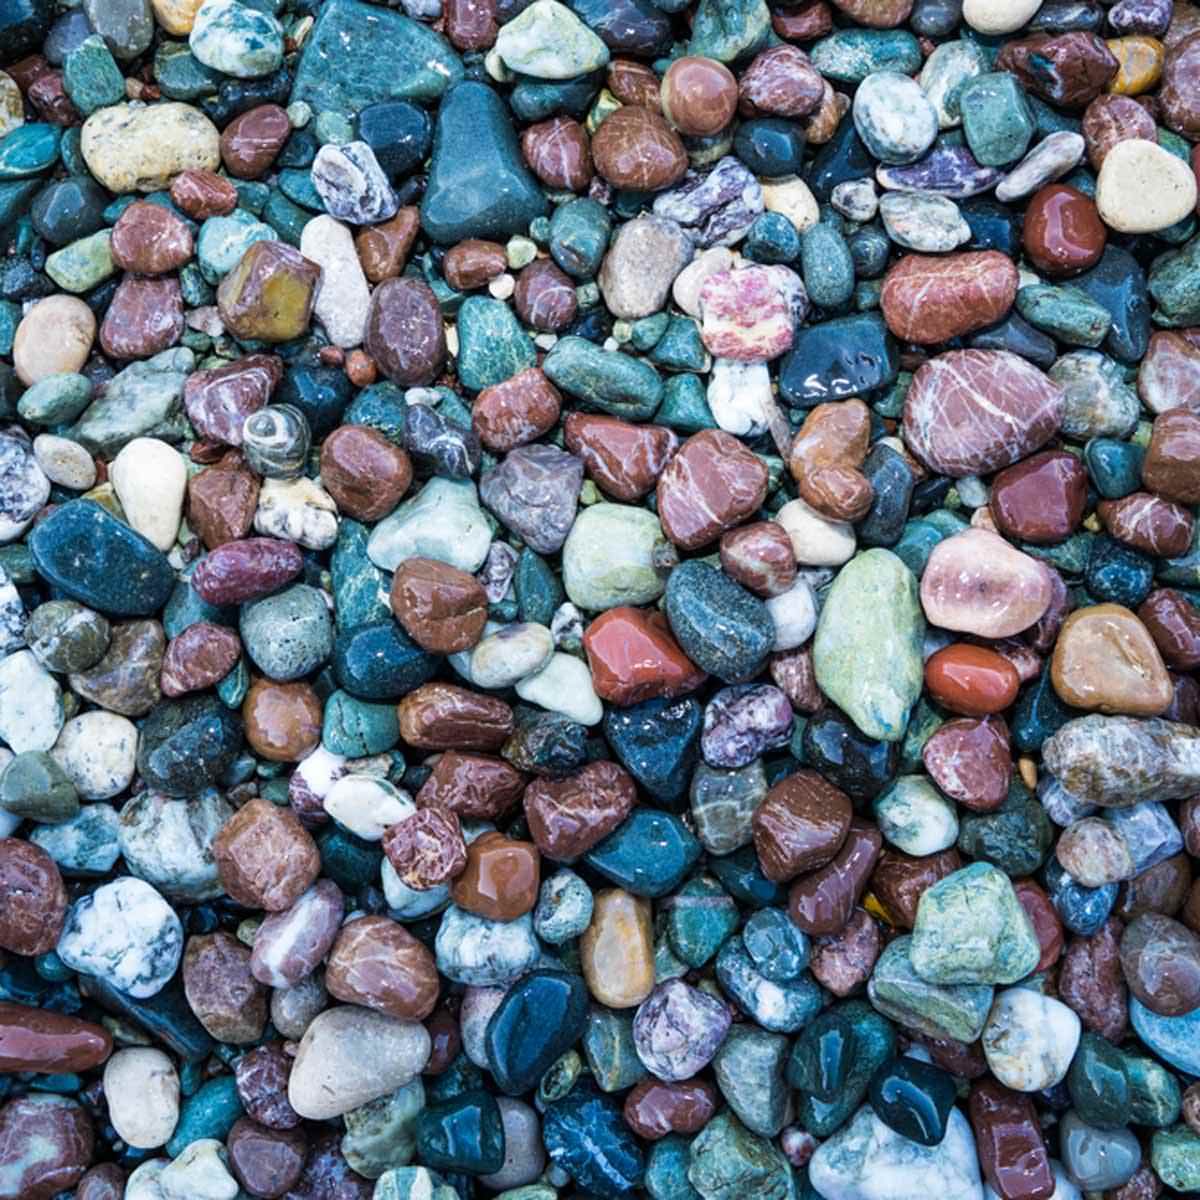 Find Some Pebbles